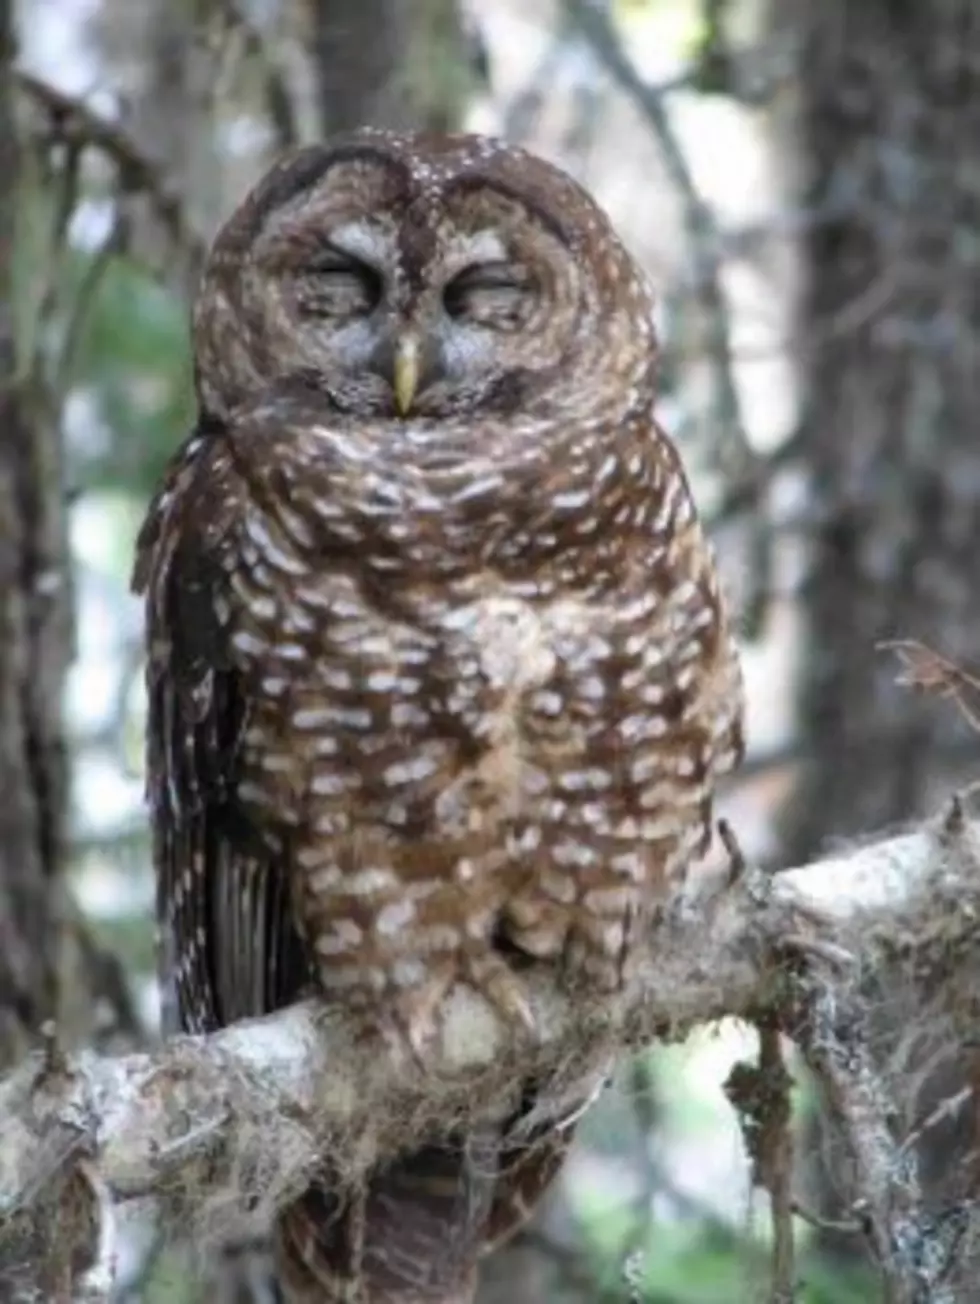 Feds sued over inaction on threatened northern spotted owl protections